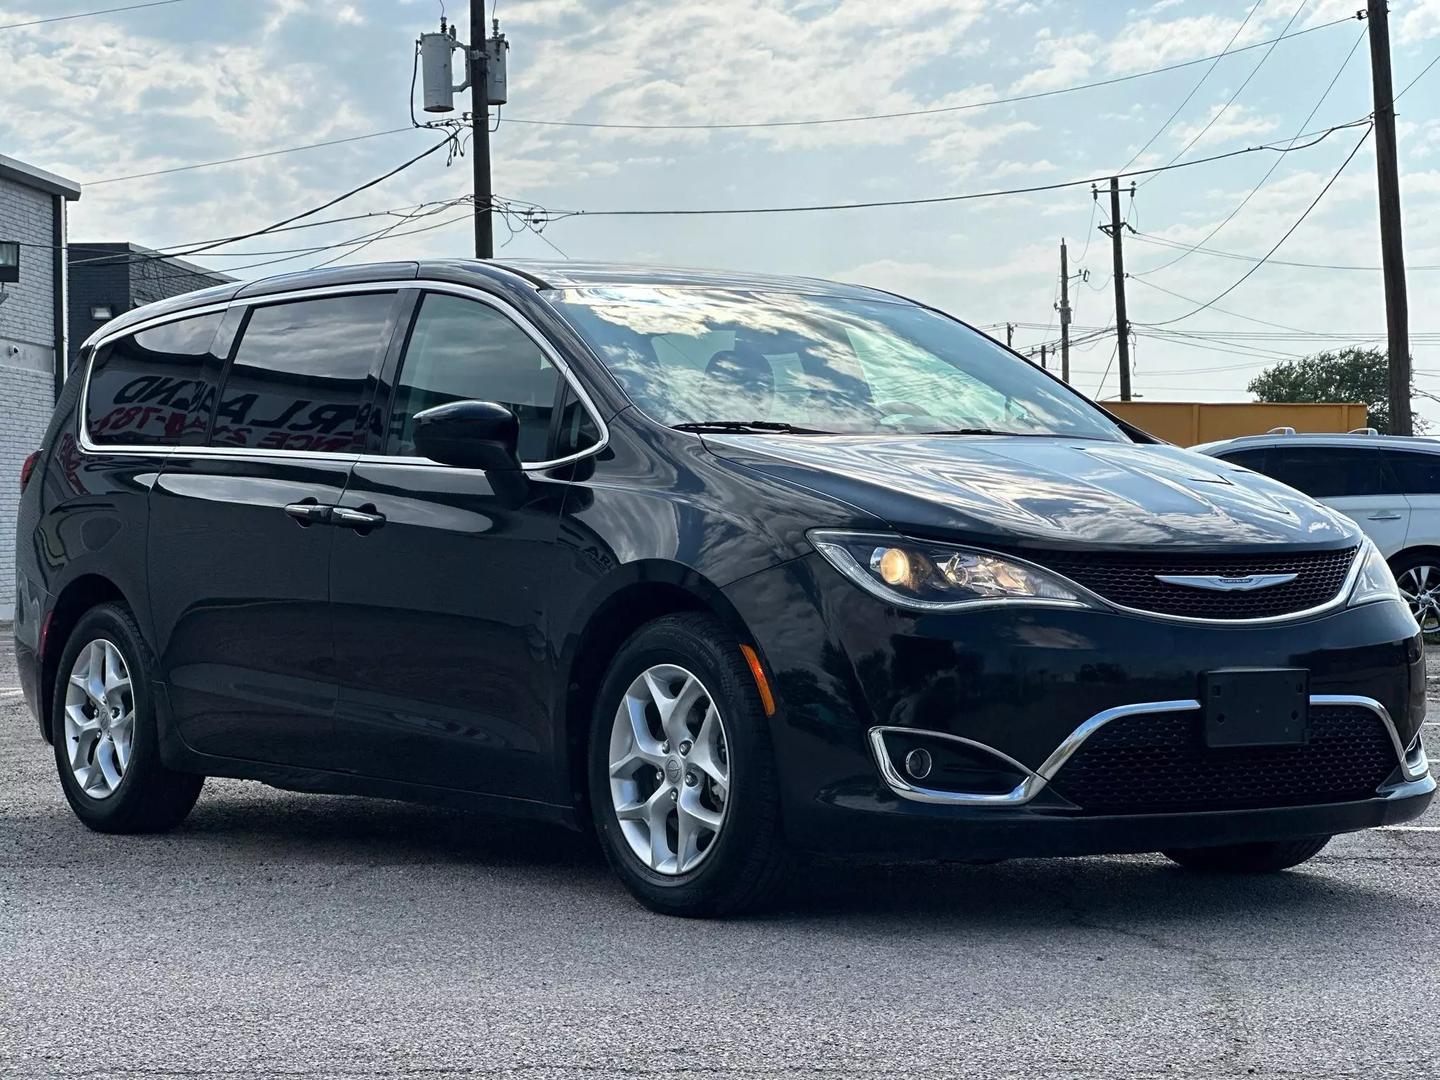 2017 Chrysler Pacifica - Image 10